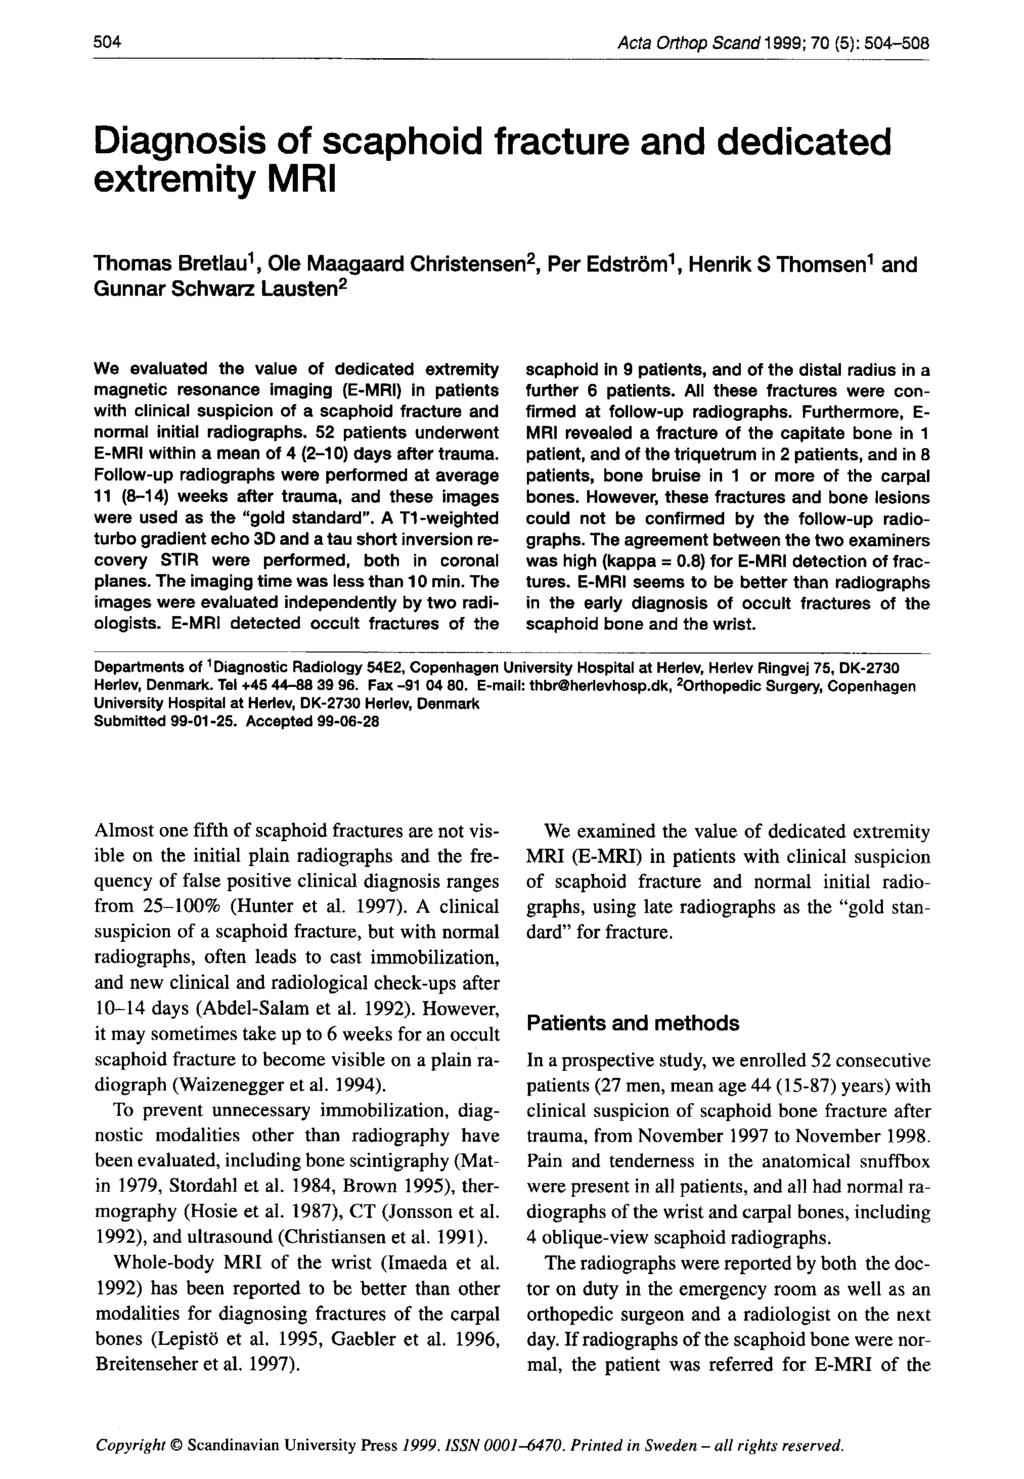 504 Acta Ofthop Scand 1999; 70 (5): 504-508 Diagnosis of scaphoid fracture and dedicated extremity MRI Thomas Bretlau', Ole Maagaard Christensen*, Per Edstrom', Henrik S Thornsen' and Gunnar Schwarz